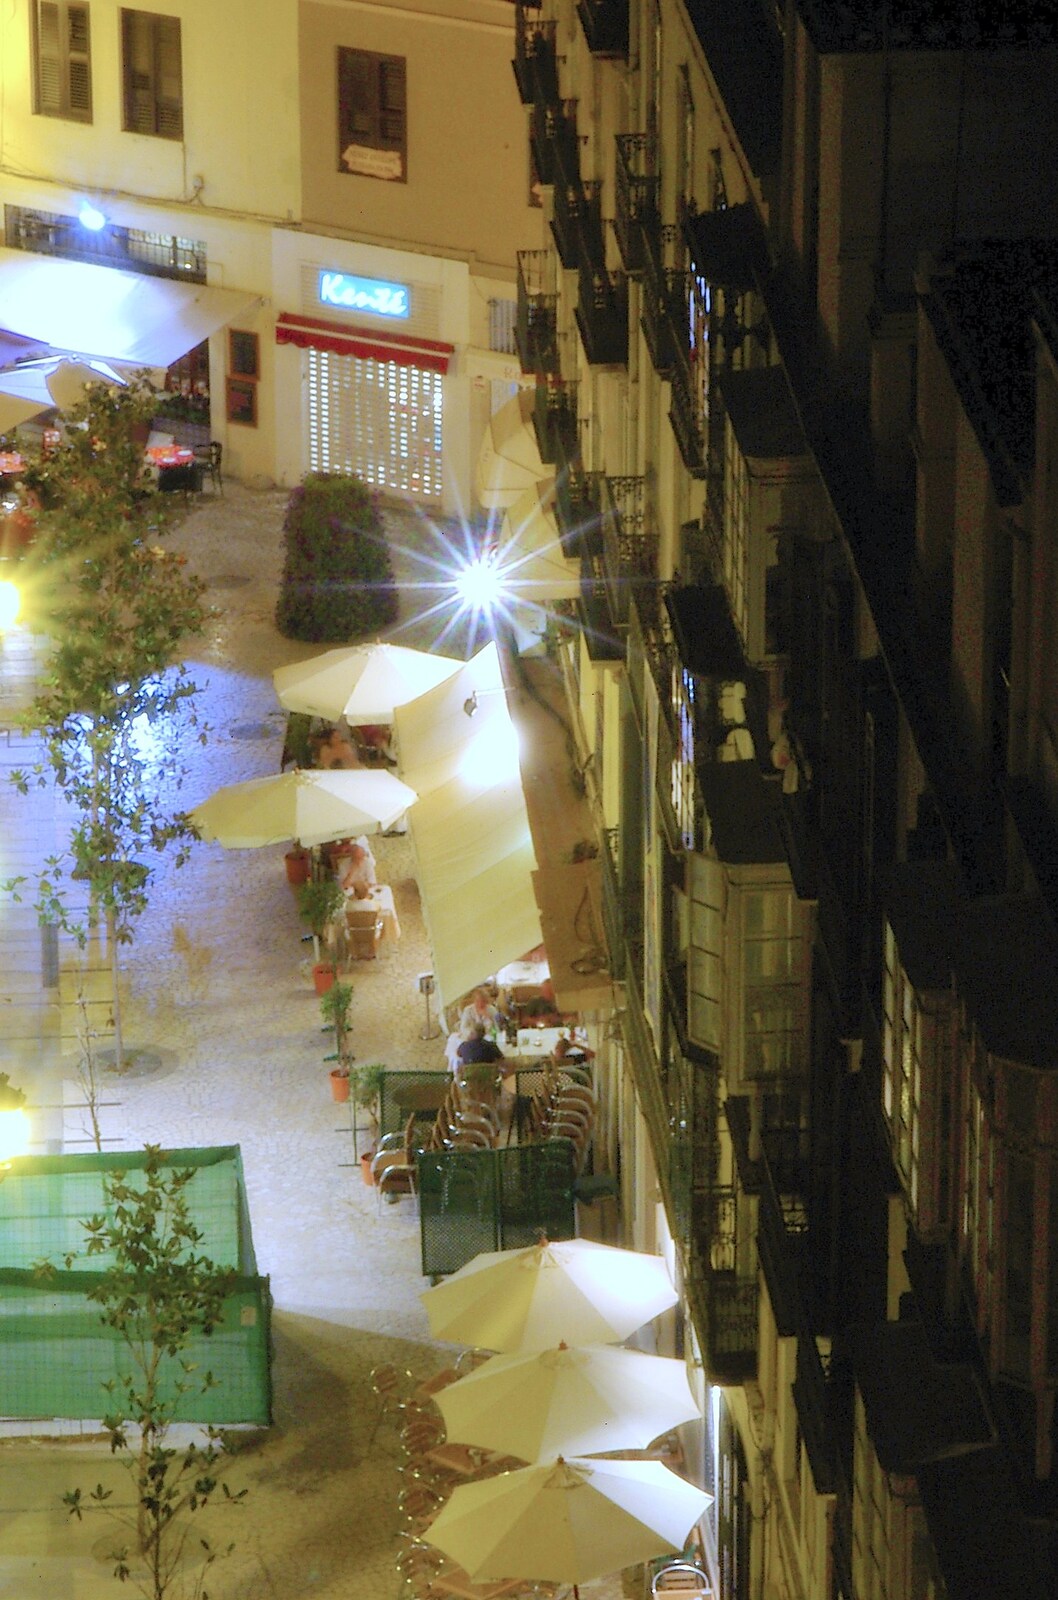 A night-time scene from the hotel balcony from Working at Telefónica, Malaga, Spain - 6th June 2006